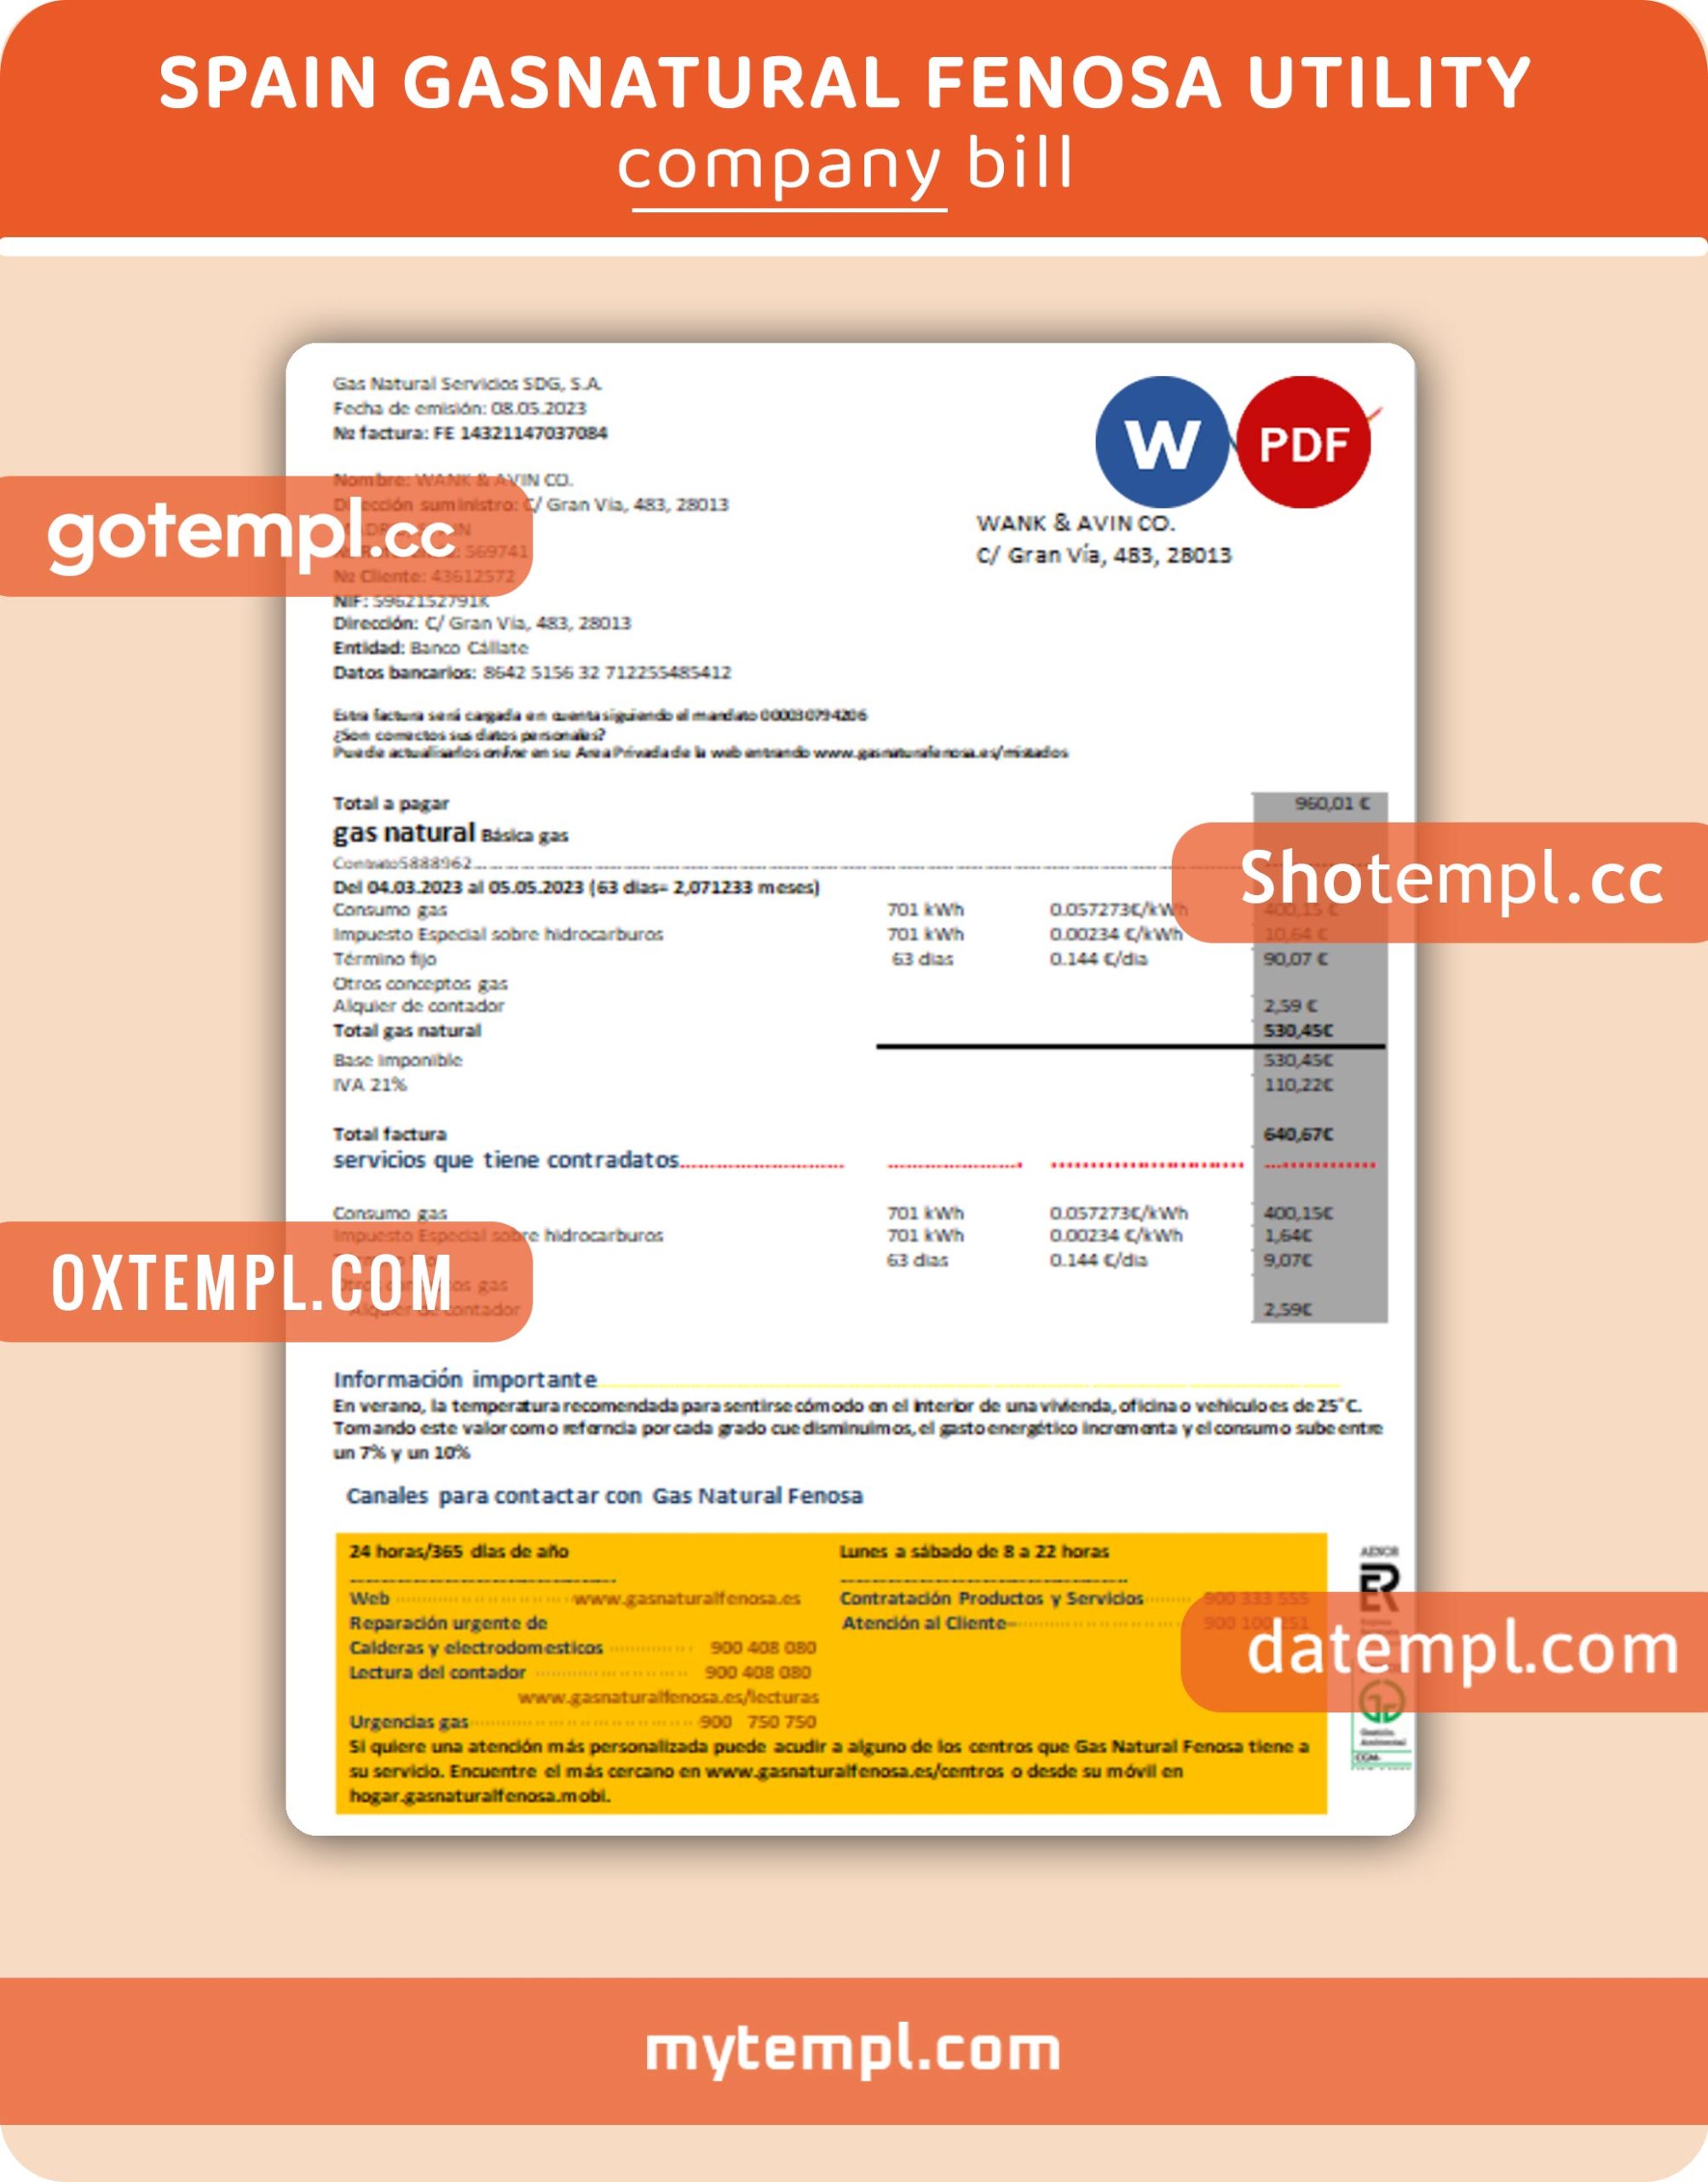 Spain GasNatural fenosa business utility bill, PDF and WORD template